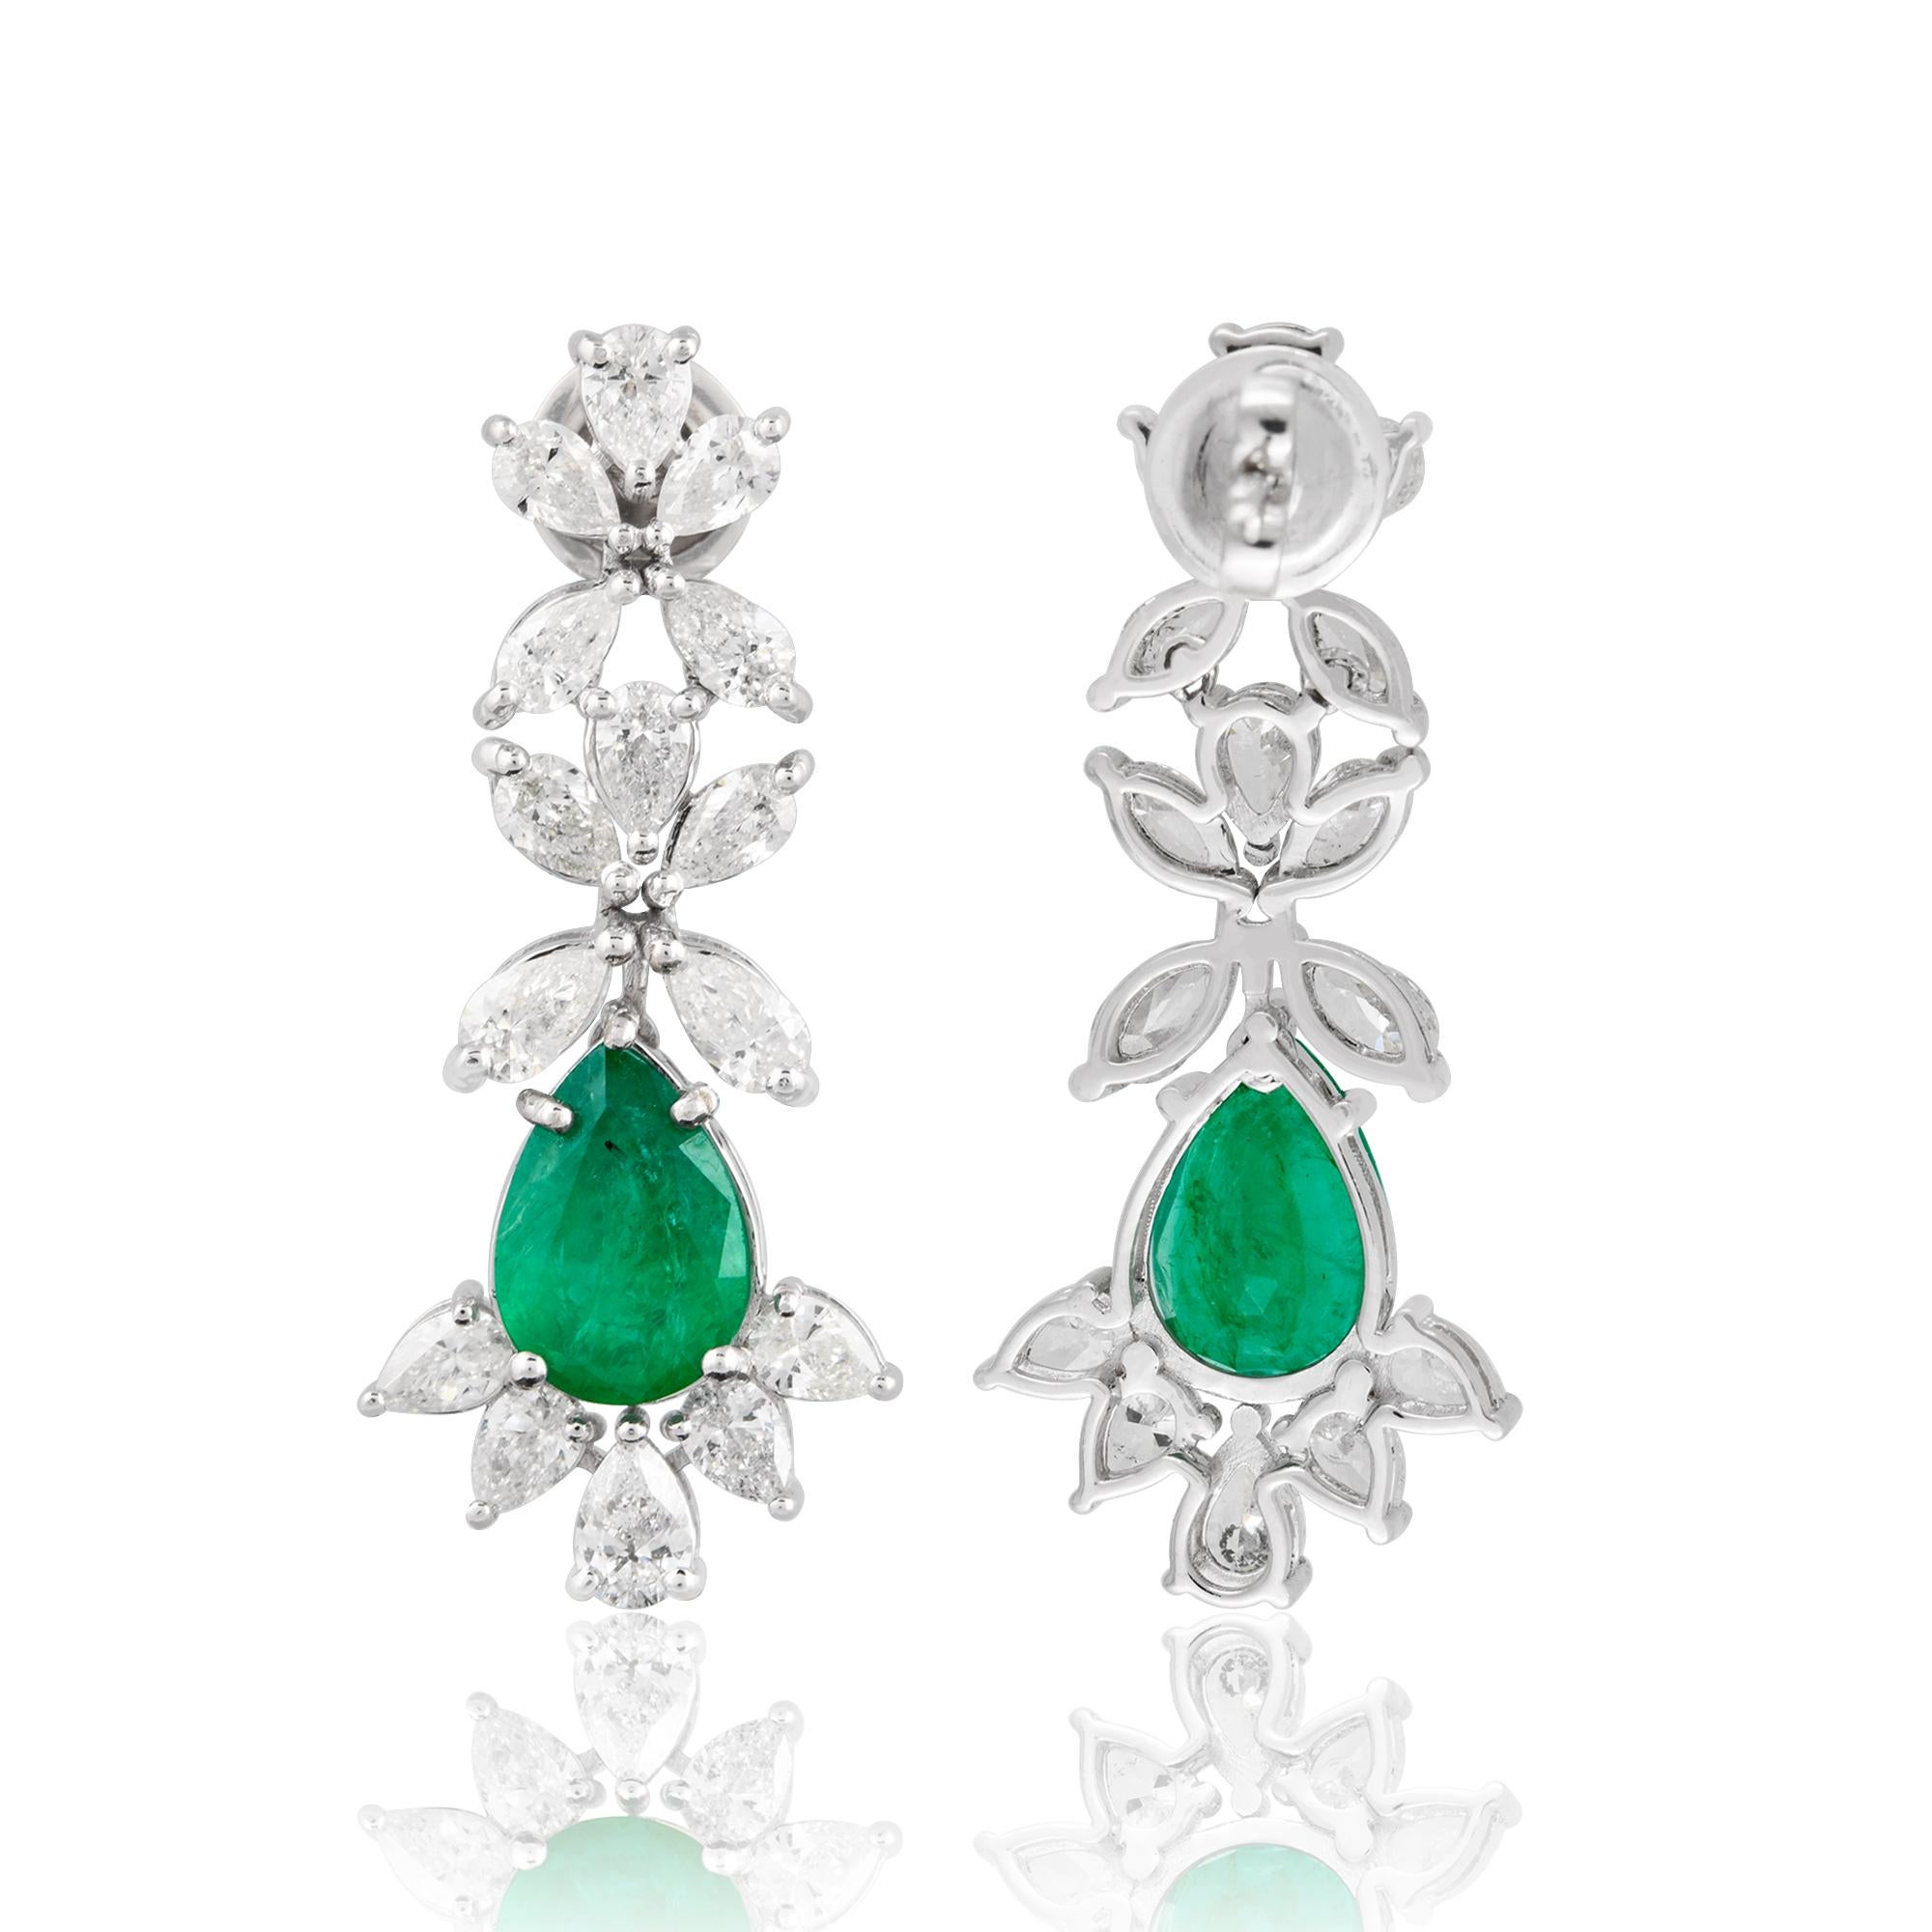 Item Code :- SEE-12387
Gross Wt. :- 10.26 gm
18k Solid White Gold Wt. :- 8.55 gm
Natural Diamond Wt. :- 4.40 Ct. ( AVERAGE DIAMOND CLARITY SI1-SI2 & COLOR H-I )
Zambian Emerald Wt. :- 4.15 Ct.
Earrings Size :- 37 mm approx.

✦